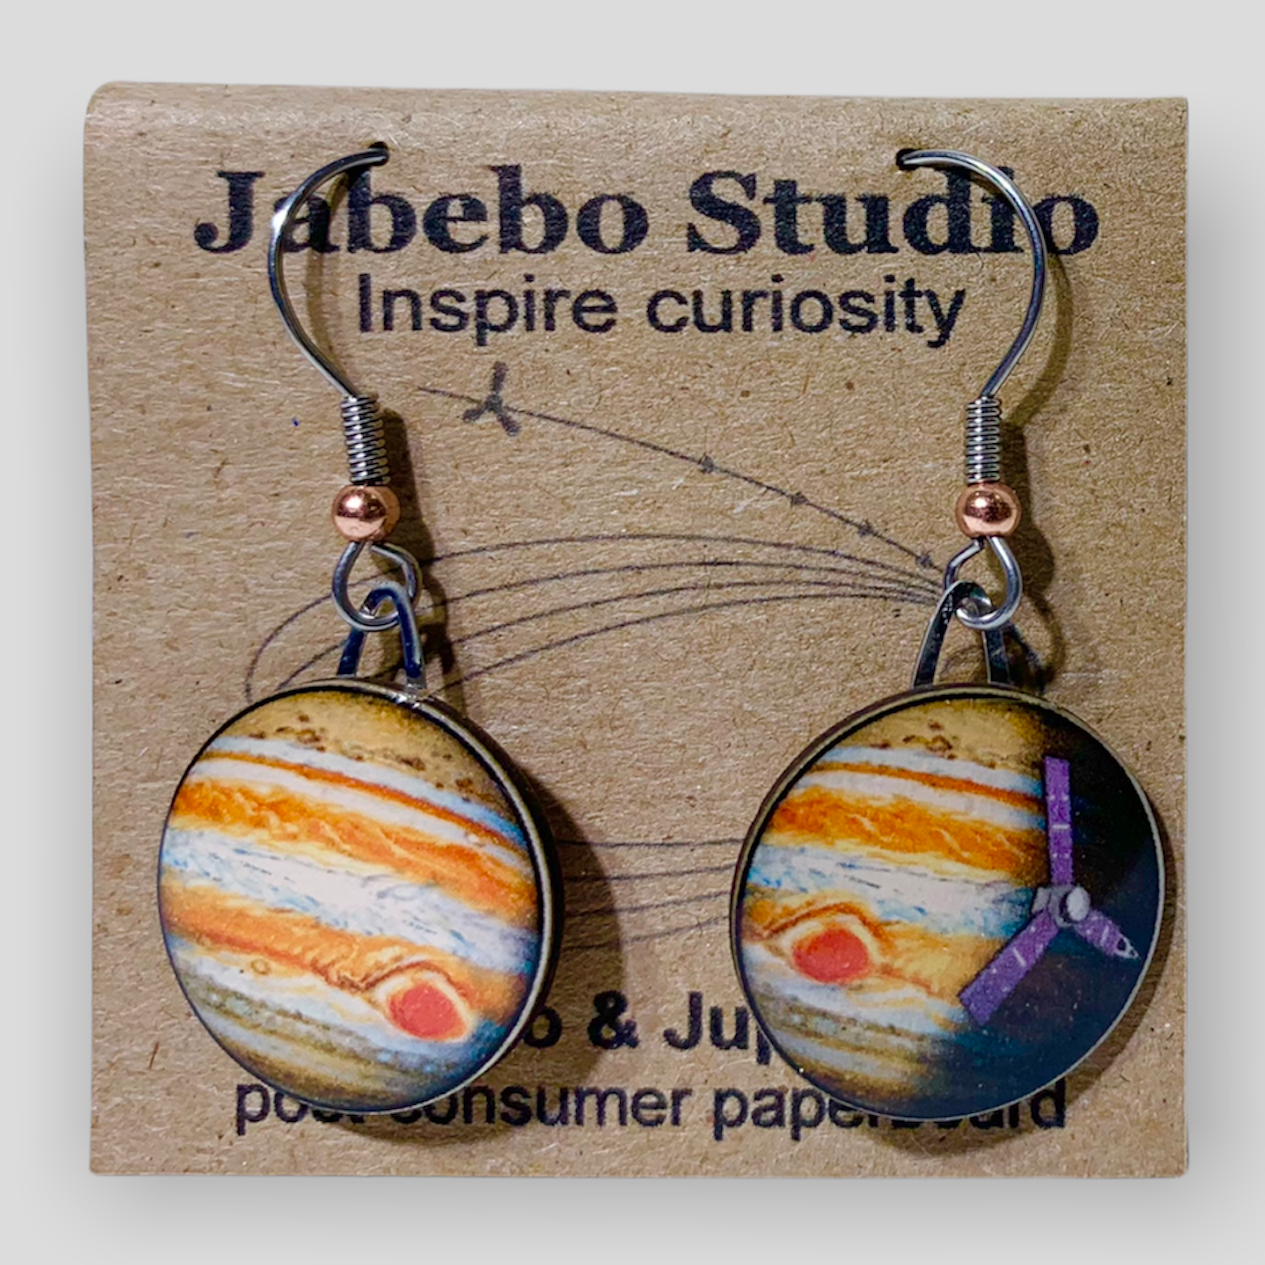 Picture shown is of 1 inch tall pair of earrings of Juno & Jupiter.